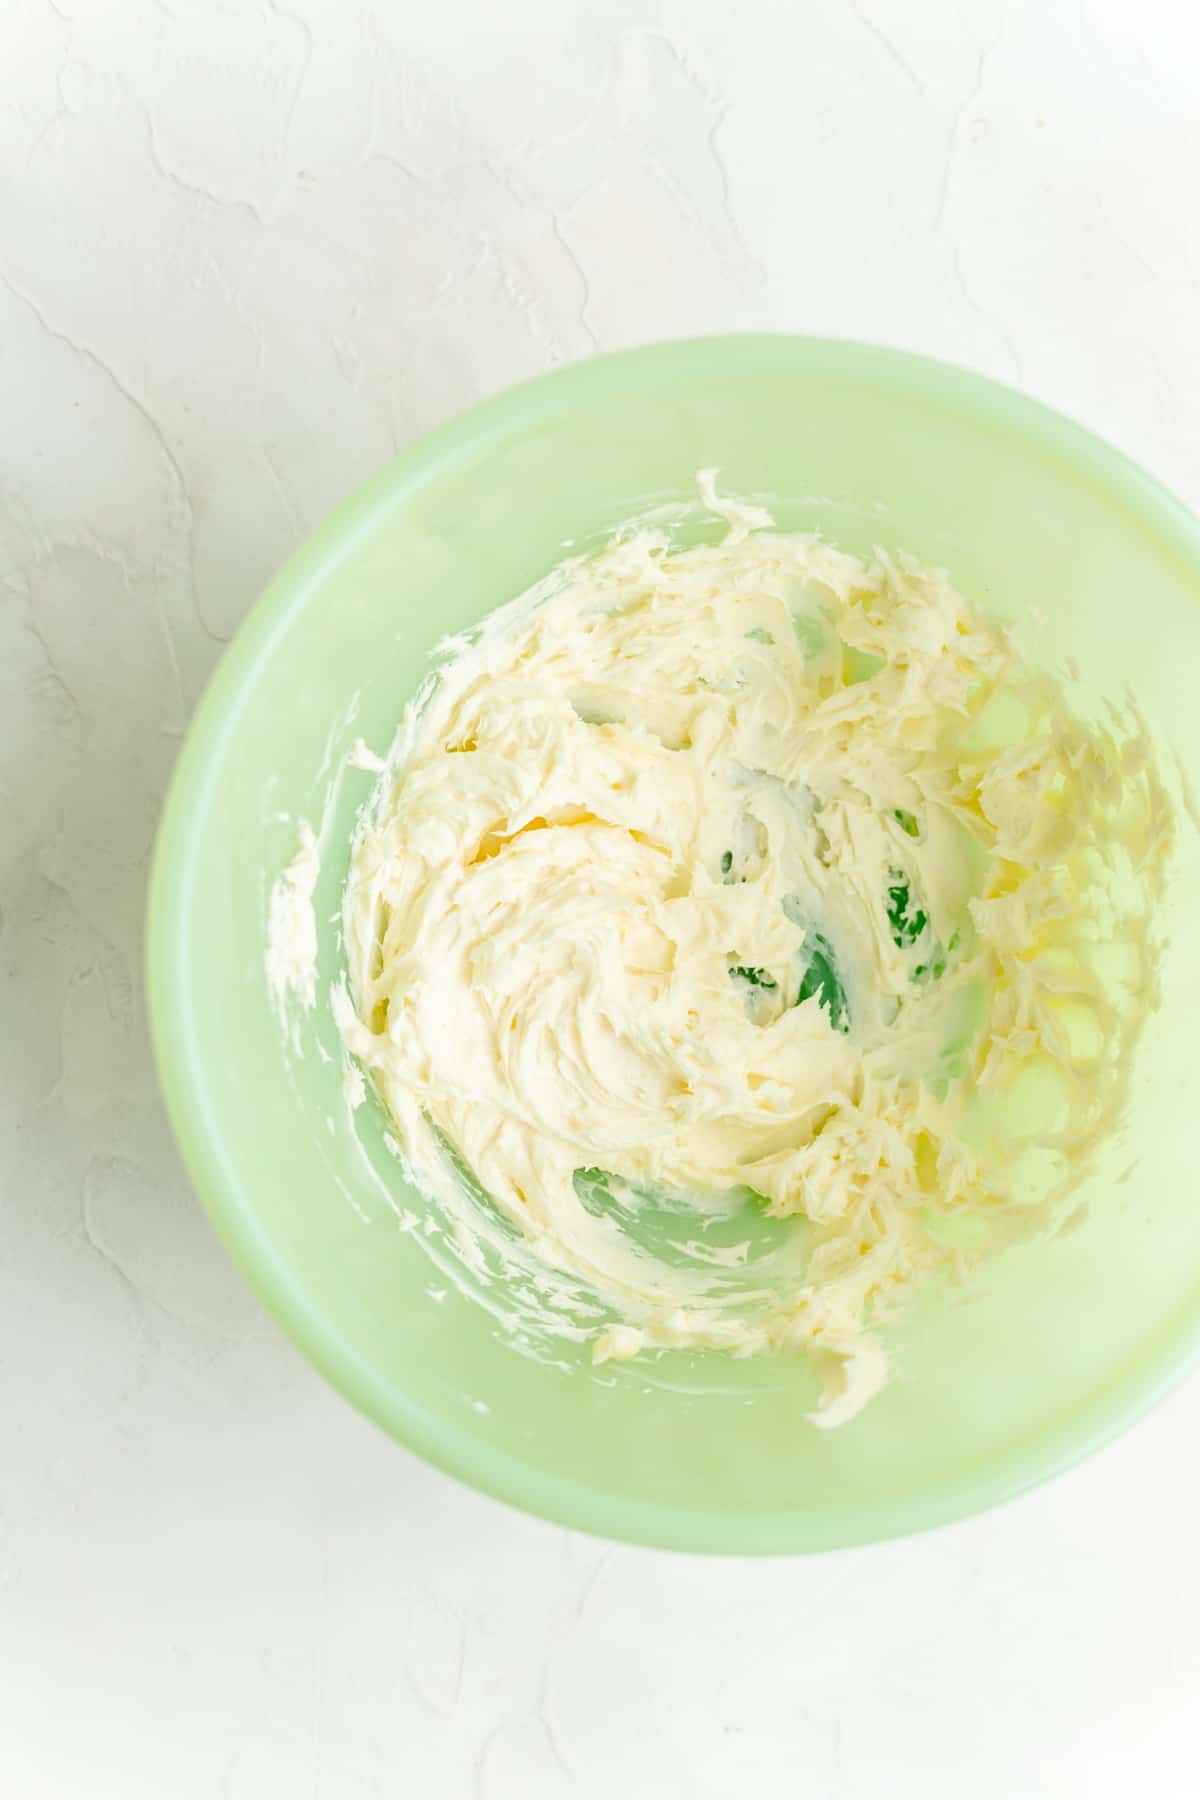 Whipped butter and cream cheese in green mixing bowl on white background.